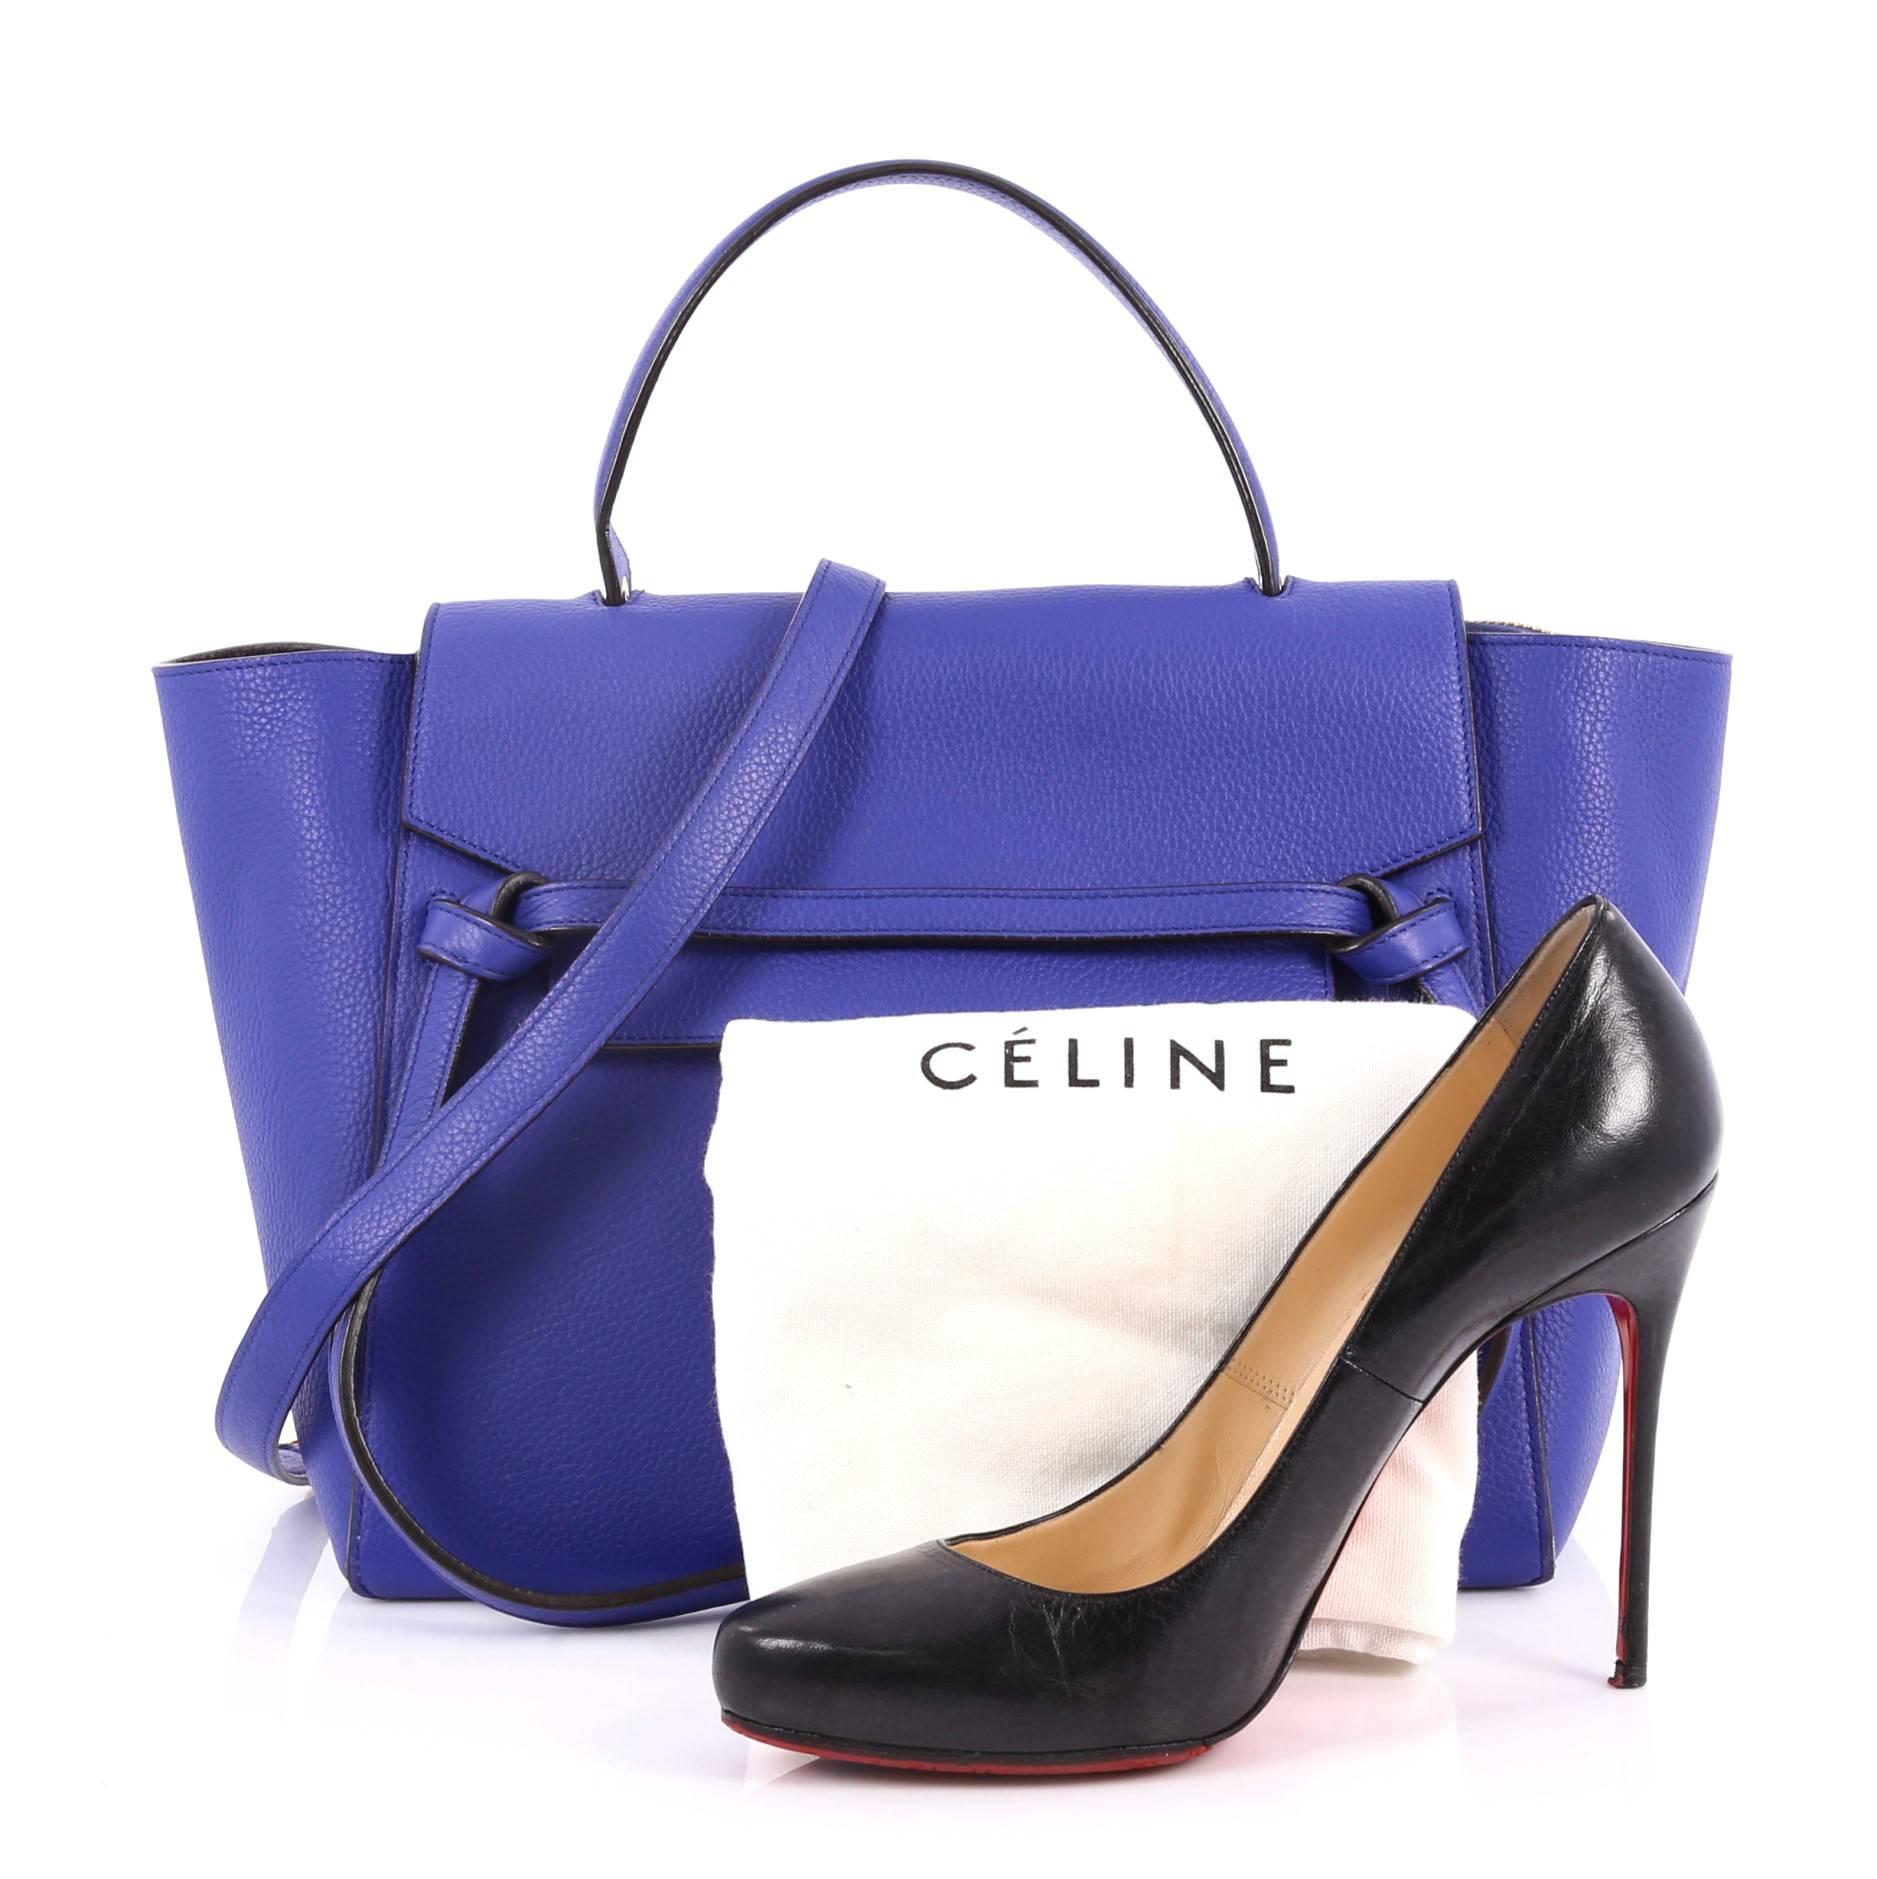 This authentic Celine Belt Bag Grainy Leather Mini is sure to make a statement. Crafted from blue grainy leather, this bold and beautiful bag features expanded wings, looped single top handle, top flap slide closure, knotted ties, zipper pocket at